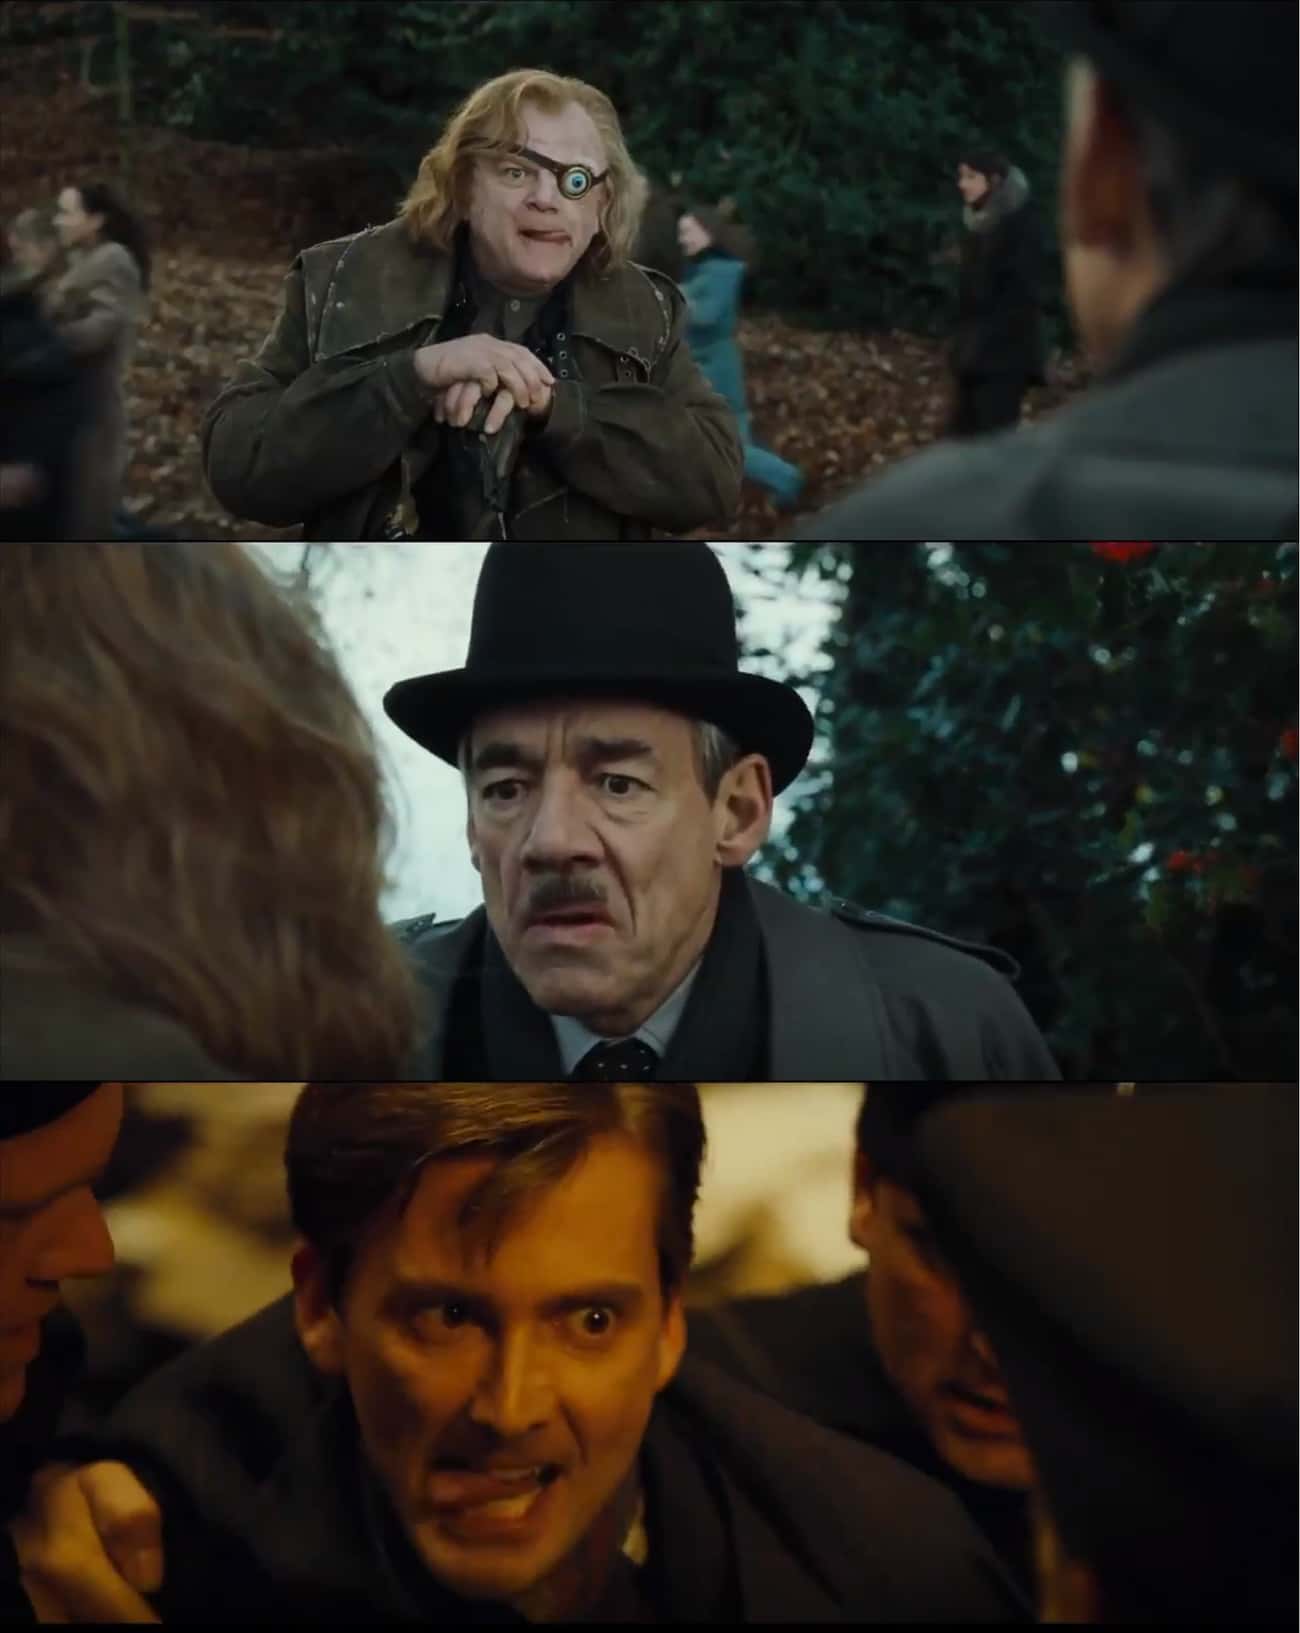 Barty Crouch Sr. Notices Mad Eye Moody's Familiar Tic